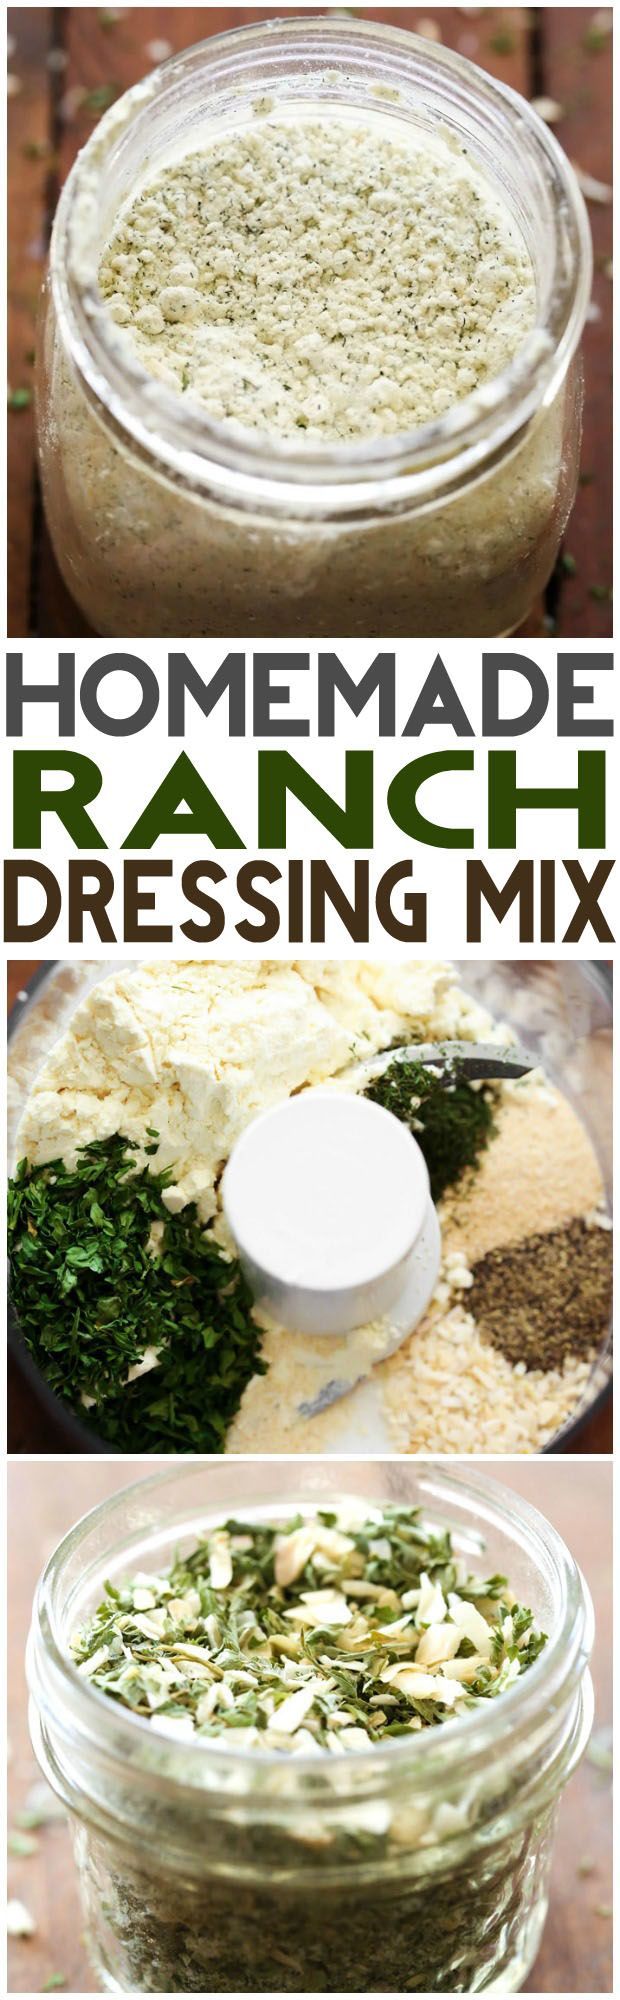 Homemade Ranch Dressing Mix… this is SO simple, so easy to make and is GREAT to have on hand! It tastes so much better homemade!